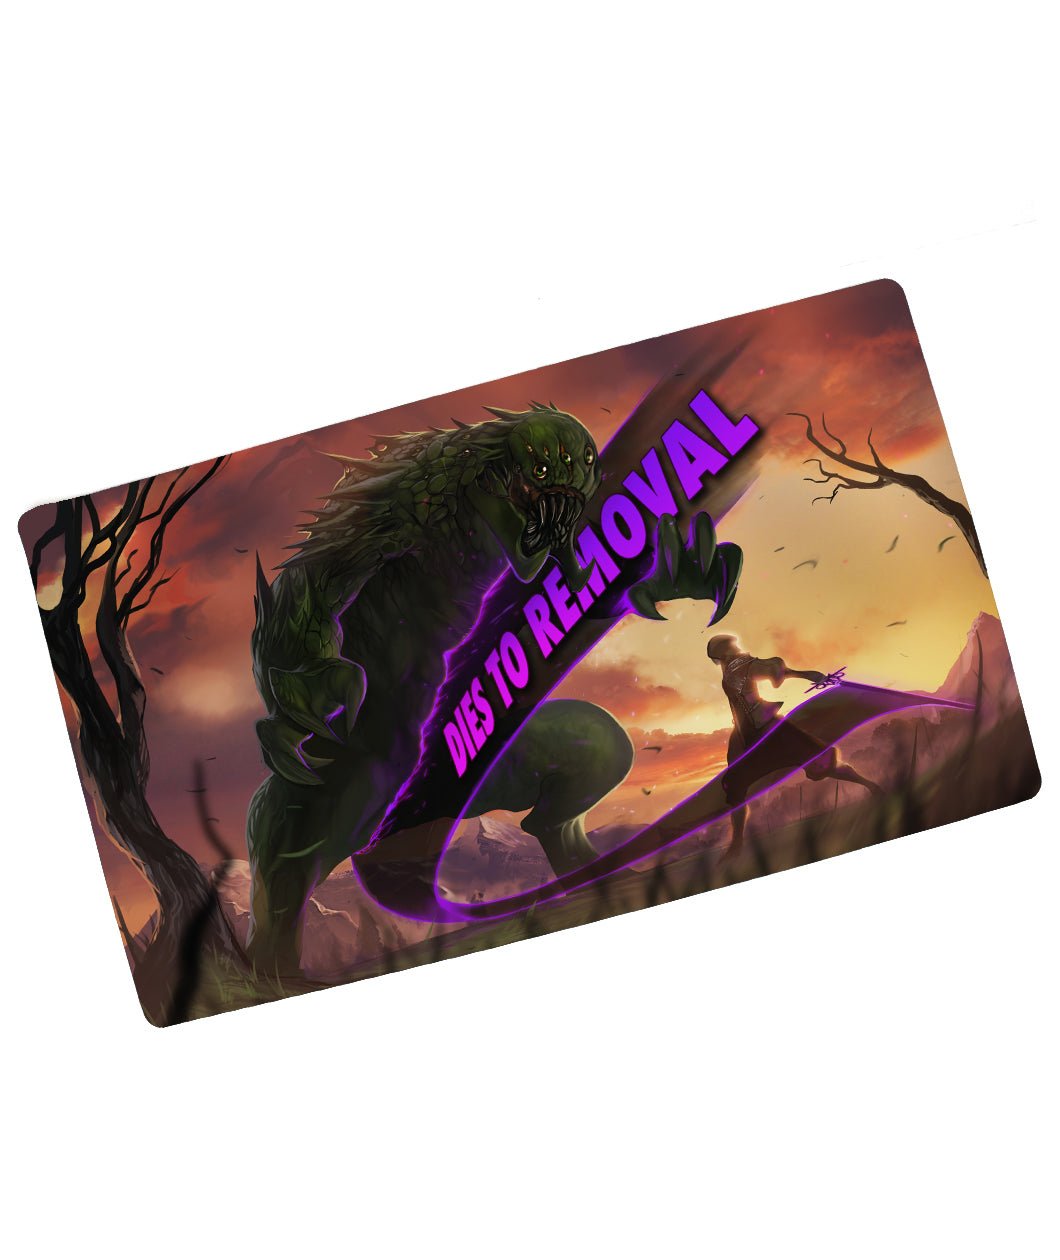 A rectangular mousepad-like mat. On it is a giant green, spiky monster with more than 2 eyes looming menacingly over a human-like fighter holding a sword, both in a desolate looking landscape. From the sword comes a purple and black swoosh that runs through the monster. In the swoosh is the purple text “DIES TO REMOVAL.”